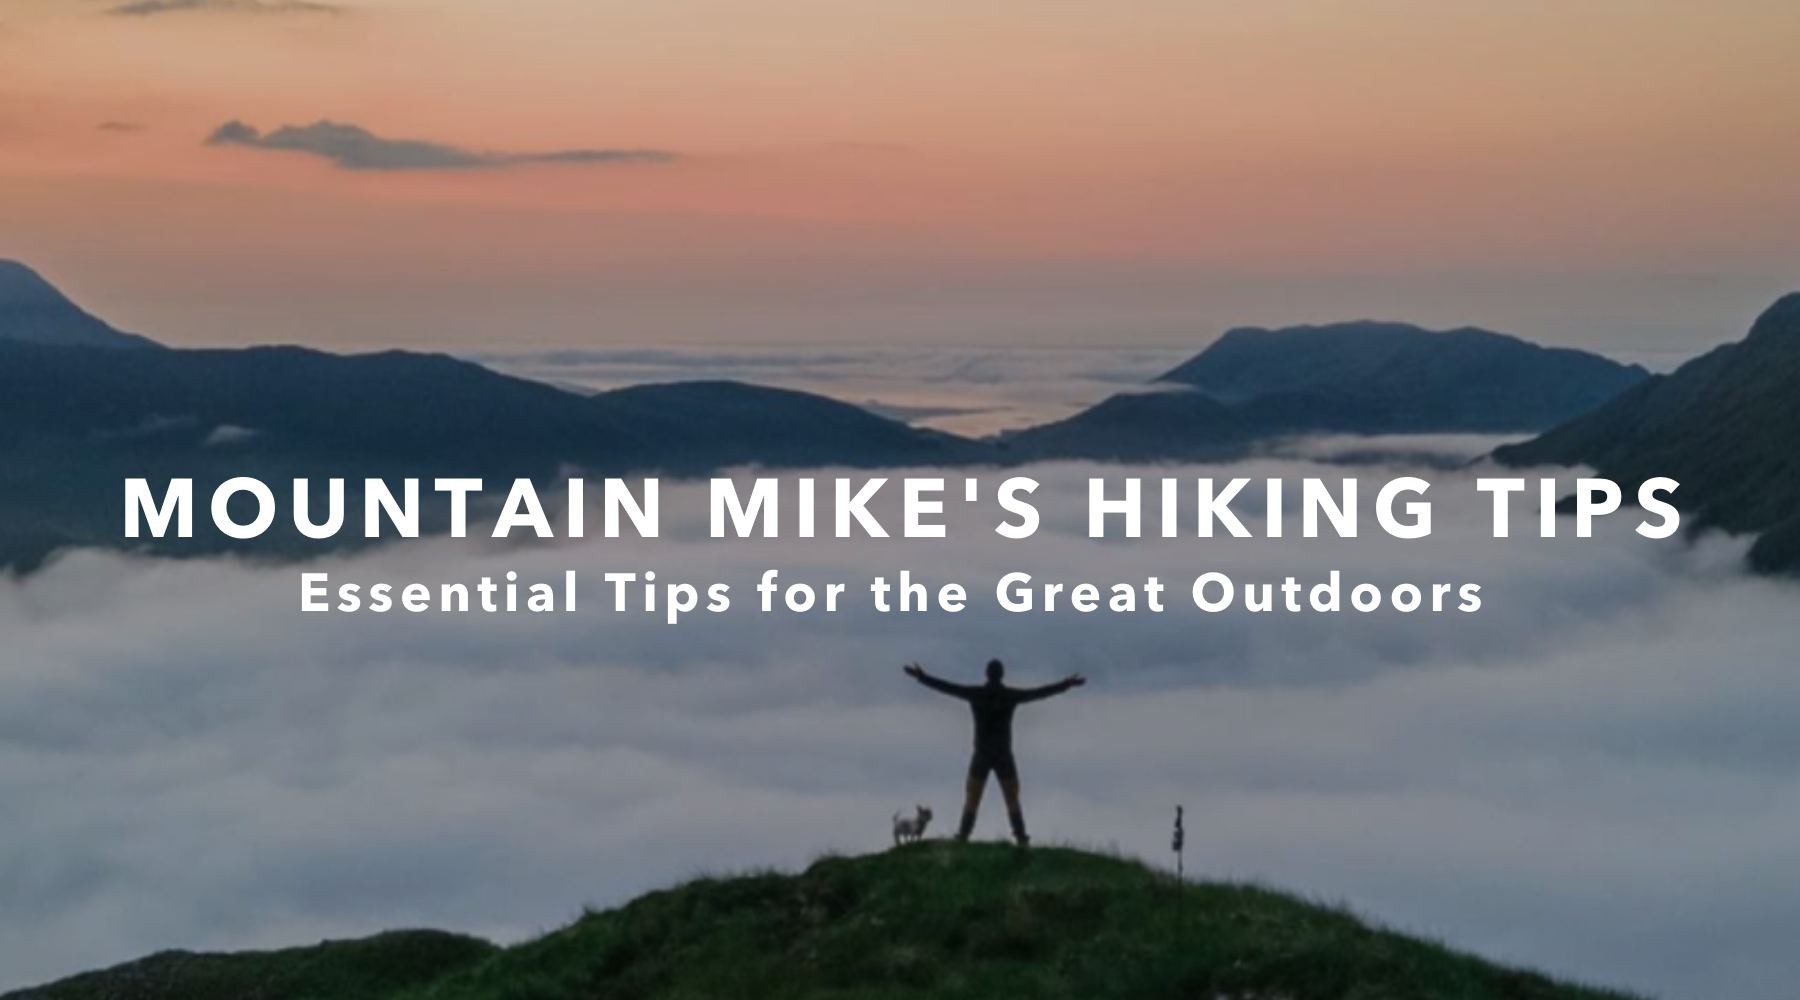 Mountain Mike's Top Hiking Tips